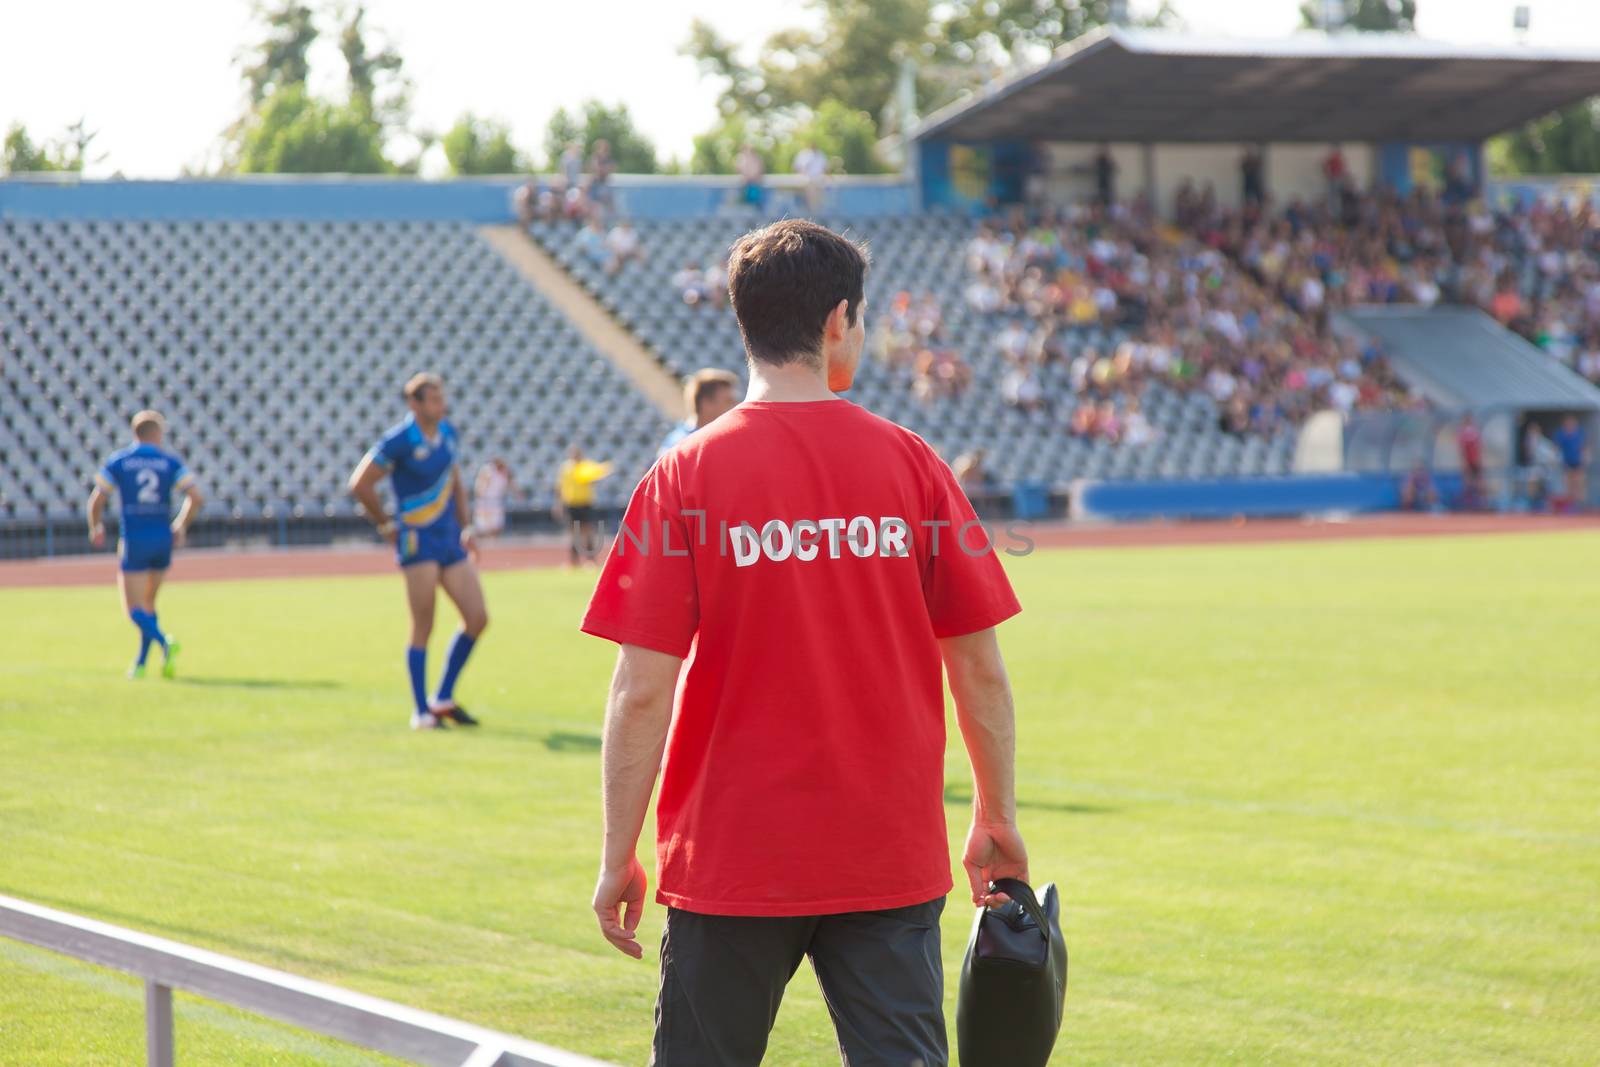 sports doctor, during the match, the players treat injuries